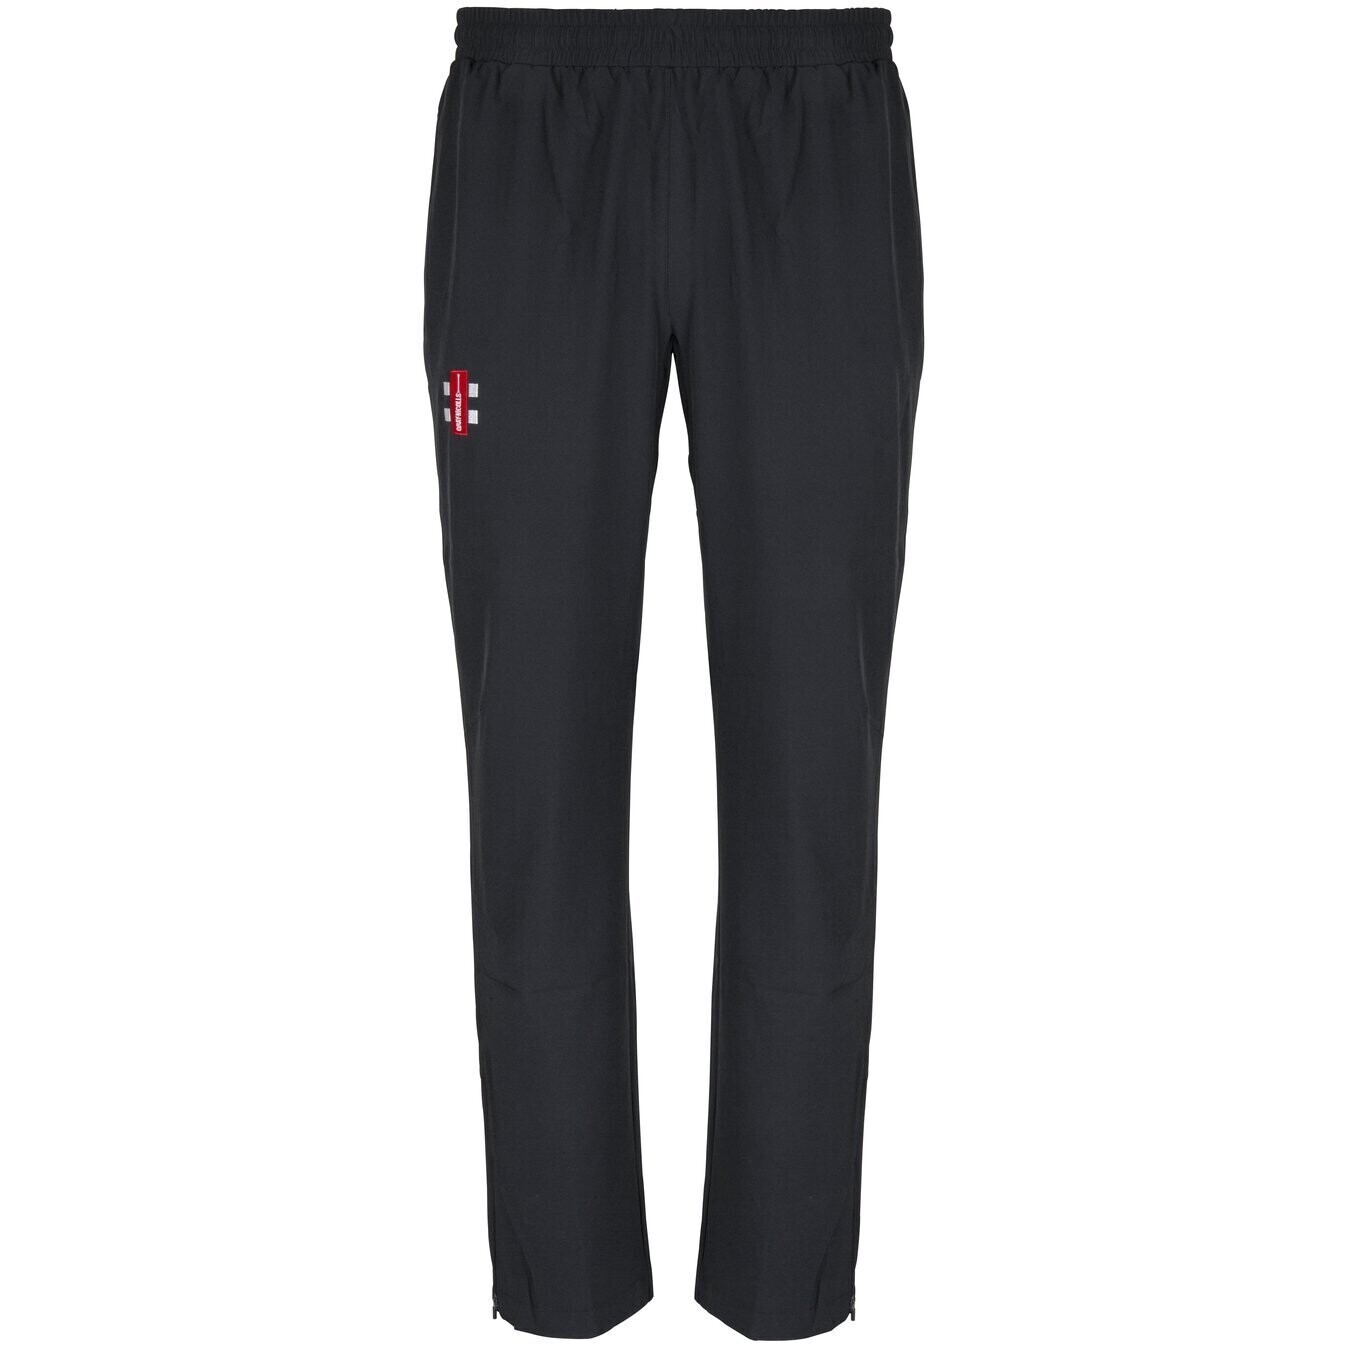 Holme Velocity Training Trousers